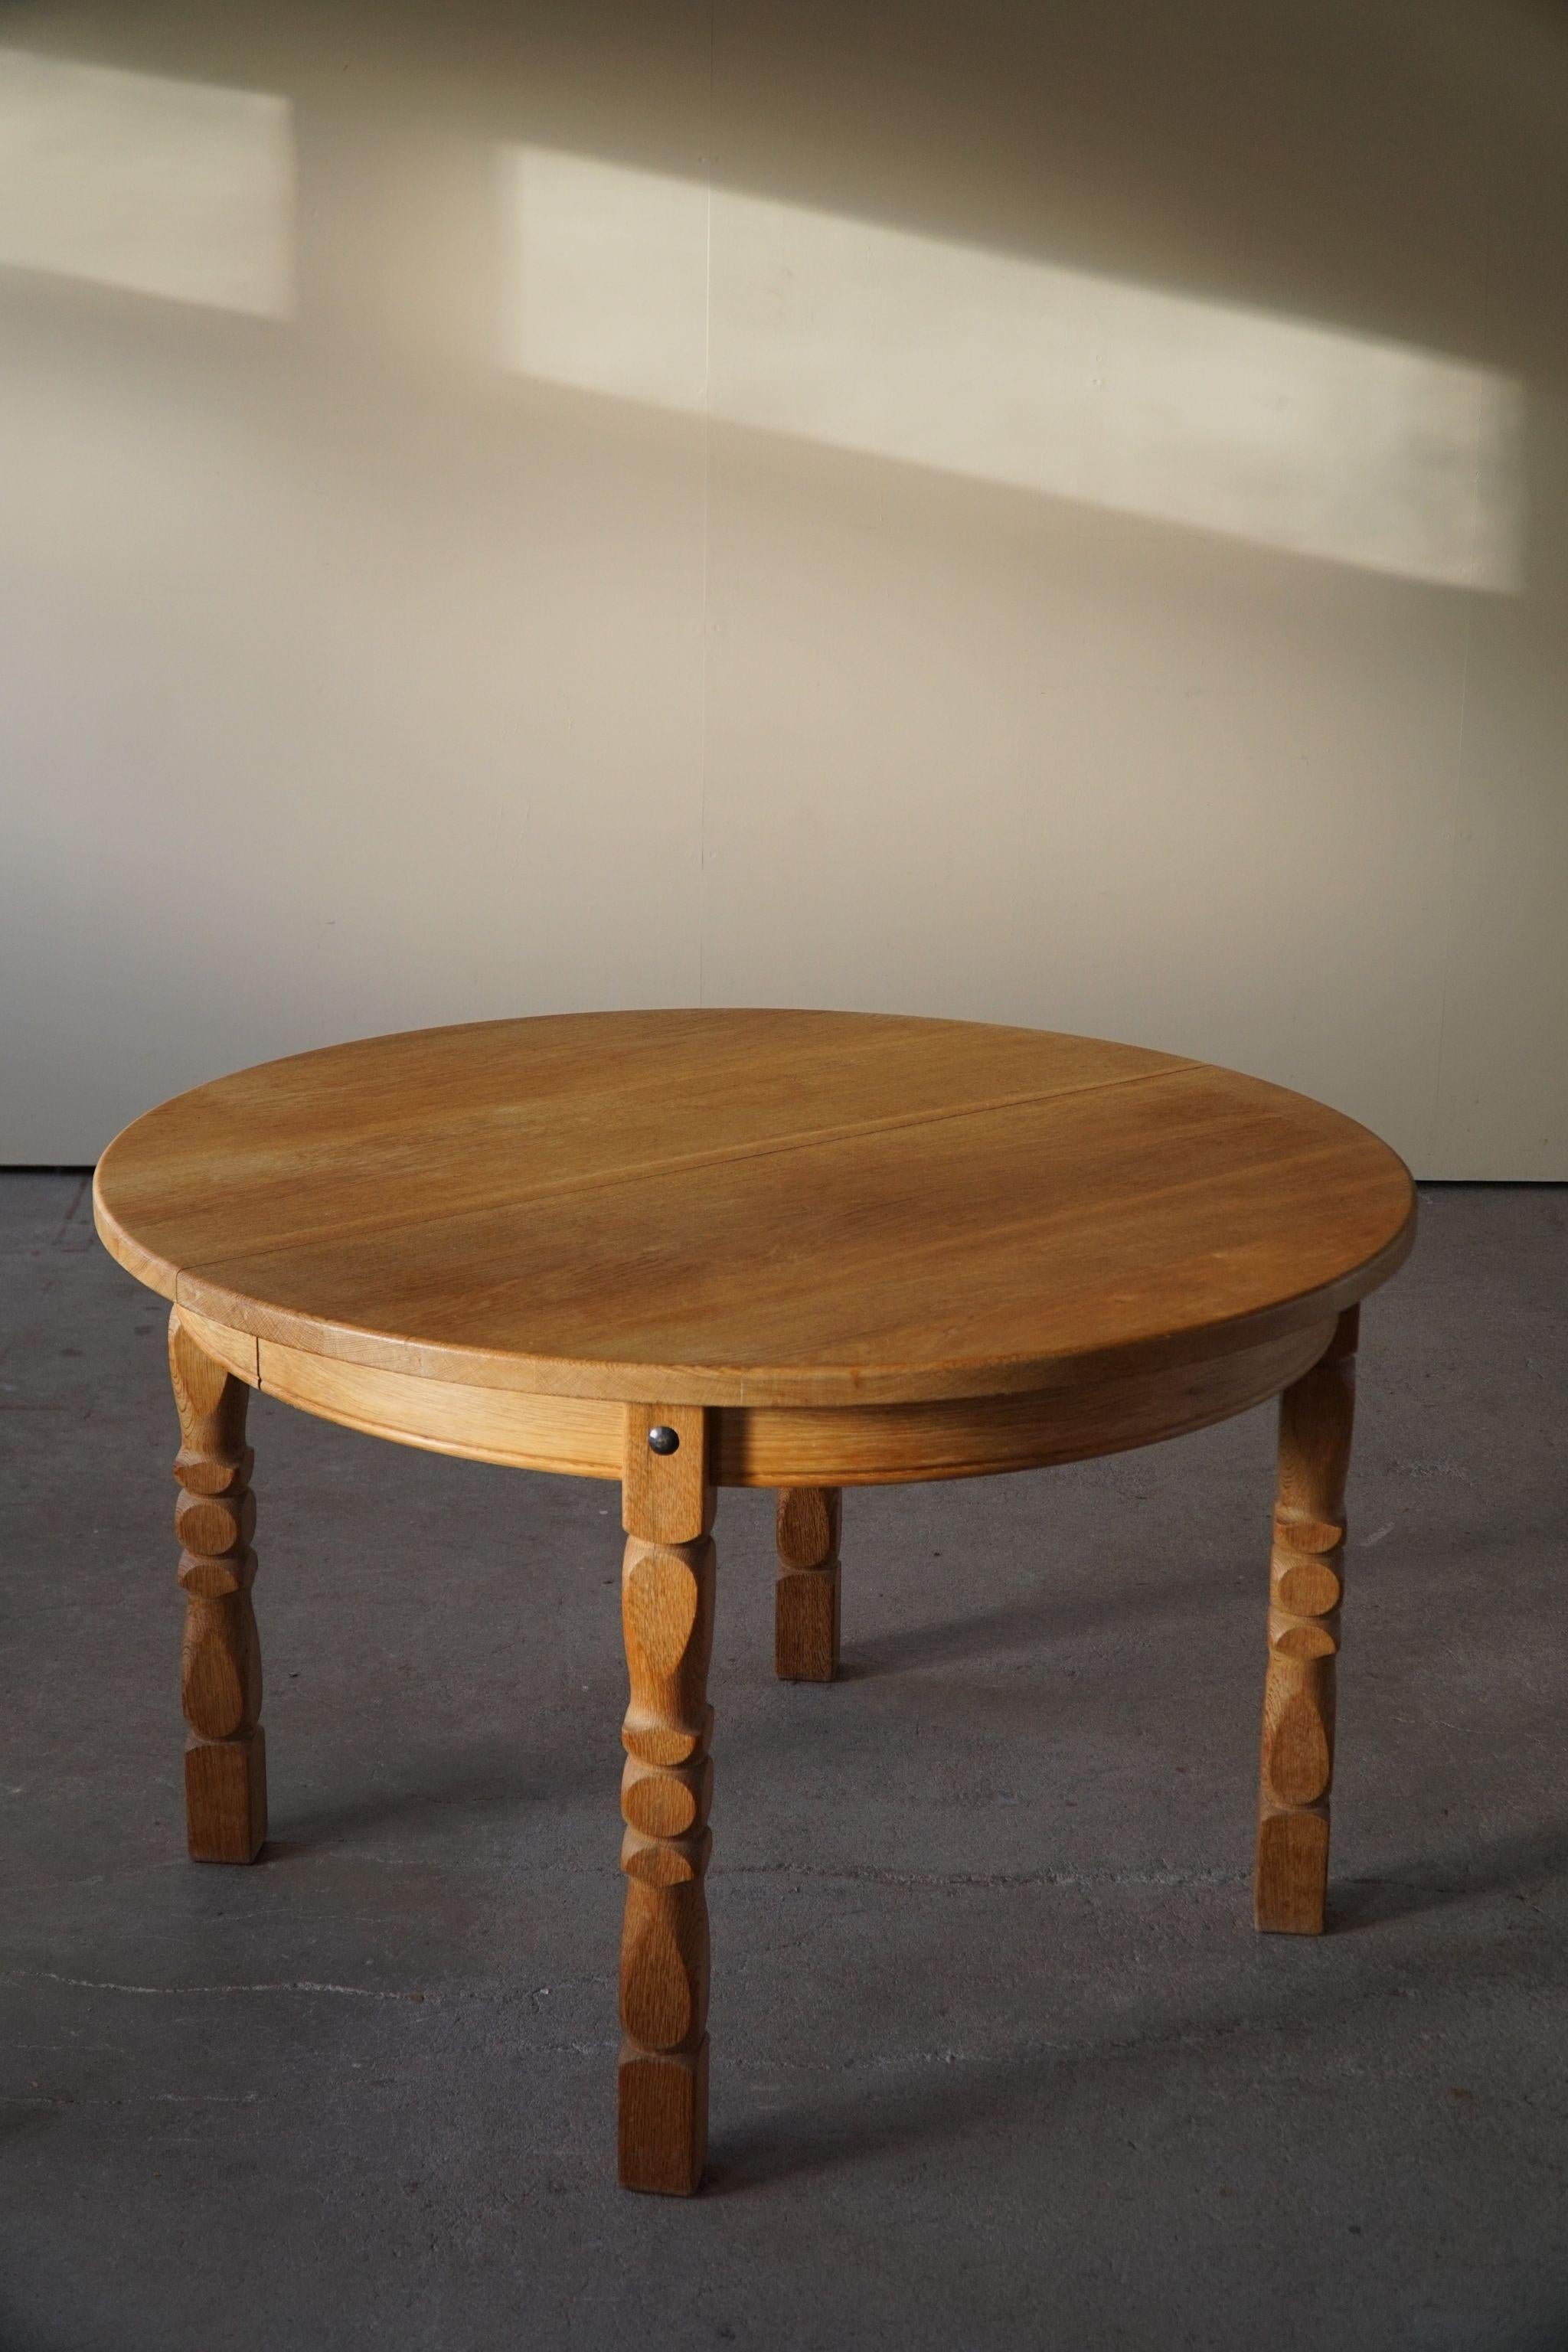 Classic round dining table in solid oak with two extensions, made in 1960s by a Danish Cabinetmaker. Such a sculptural figure for the modern interior.

Curved legs and great craftmanship in this brutalist table. 
Light signs of wear on the